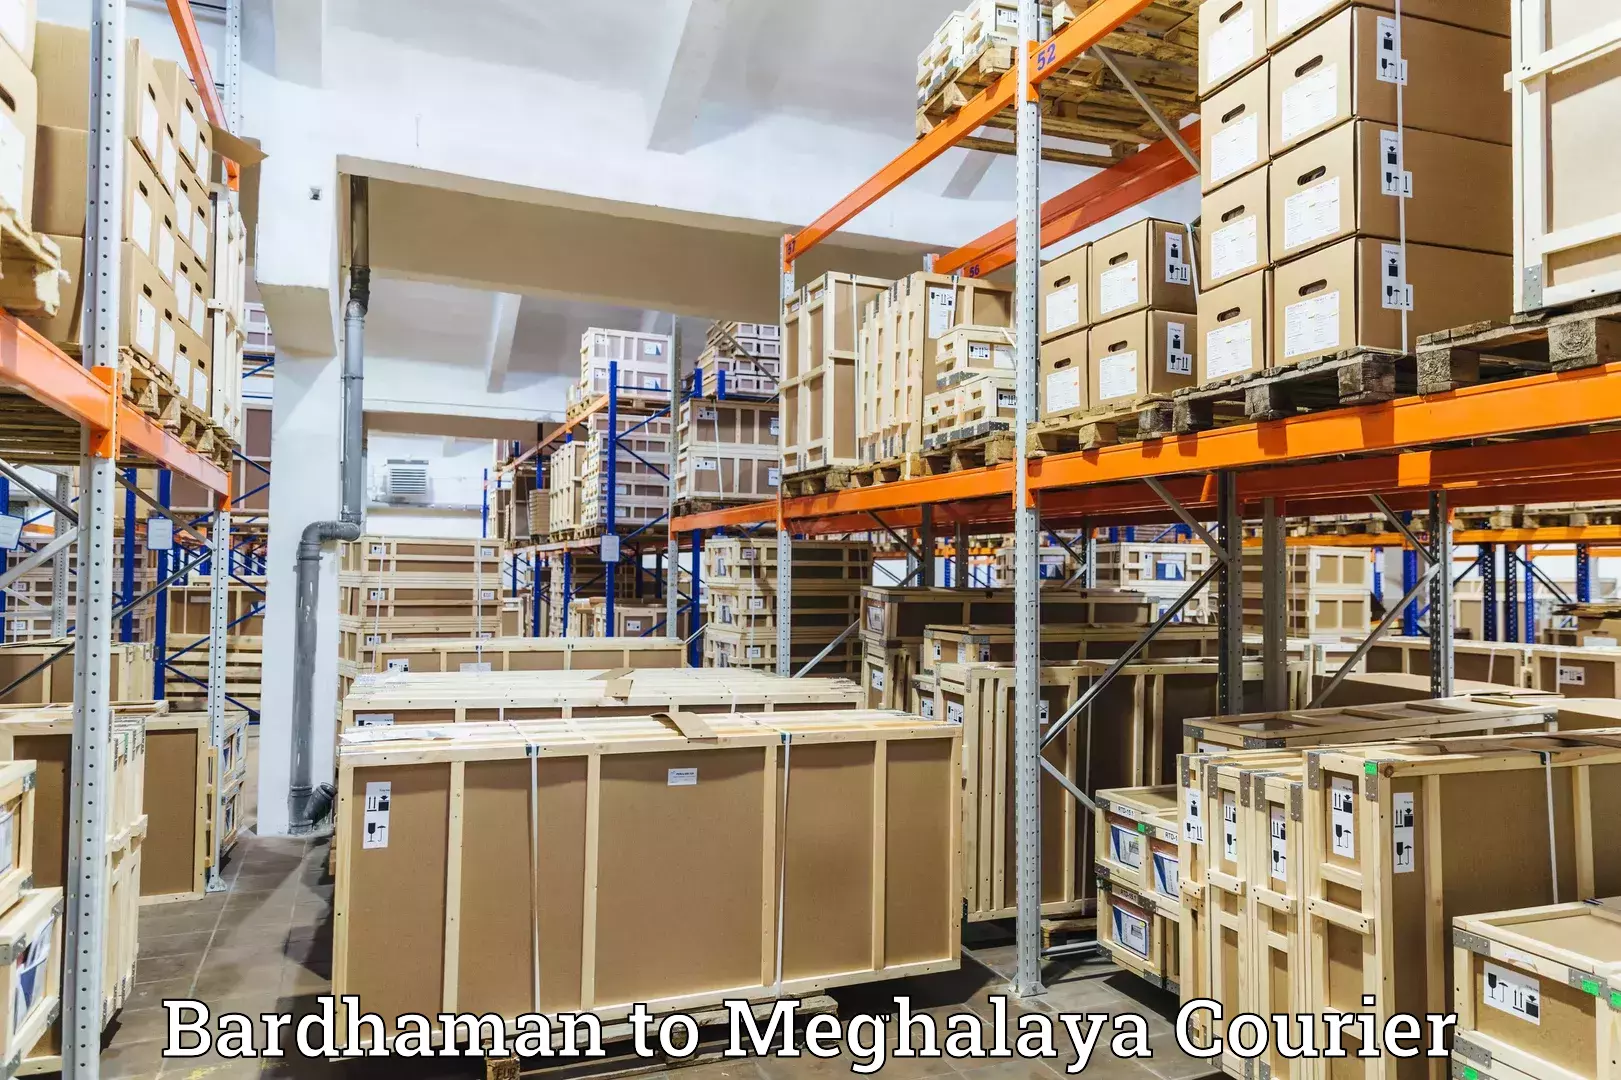 State-of-the-art courier technology Bardhaman to Meghalaya